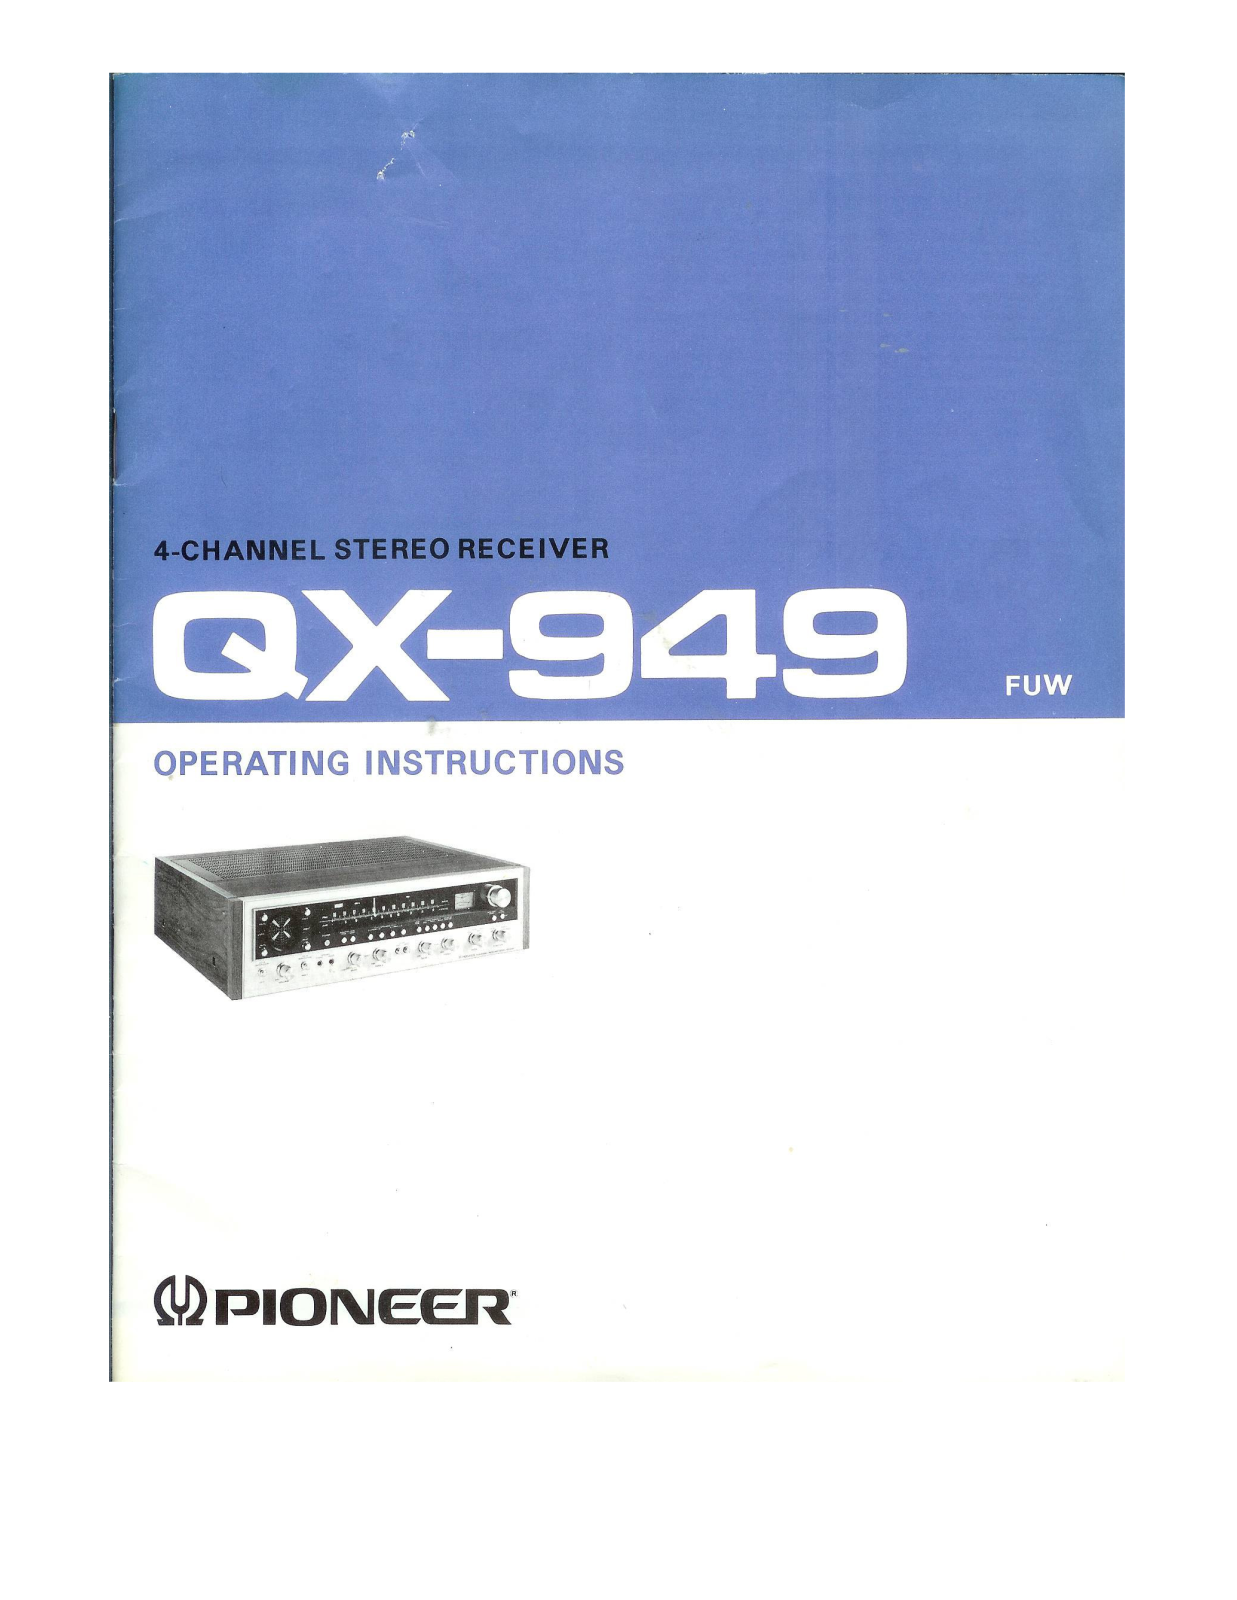 Pioneer QX-949A Owners Manual